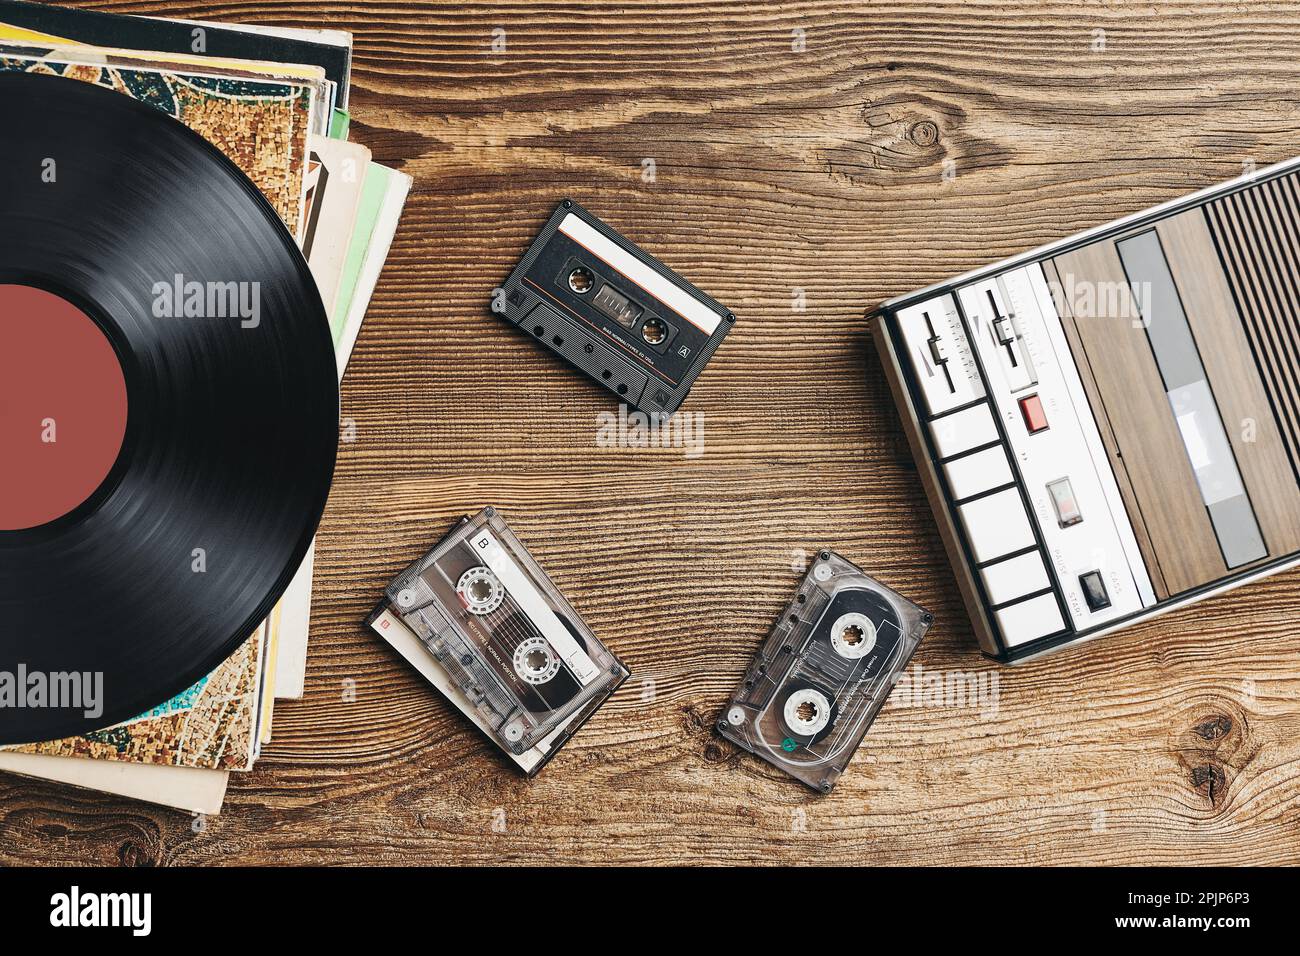 Vinyl records, cassette tapes and cassette recorder on wooden table. Retro music style. 80s music party. Vintage style. Analog equipment. Stereo sound Stock Photo